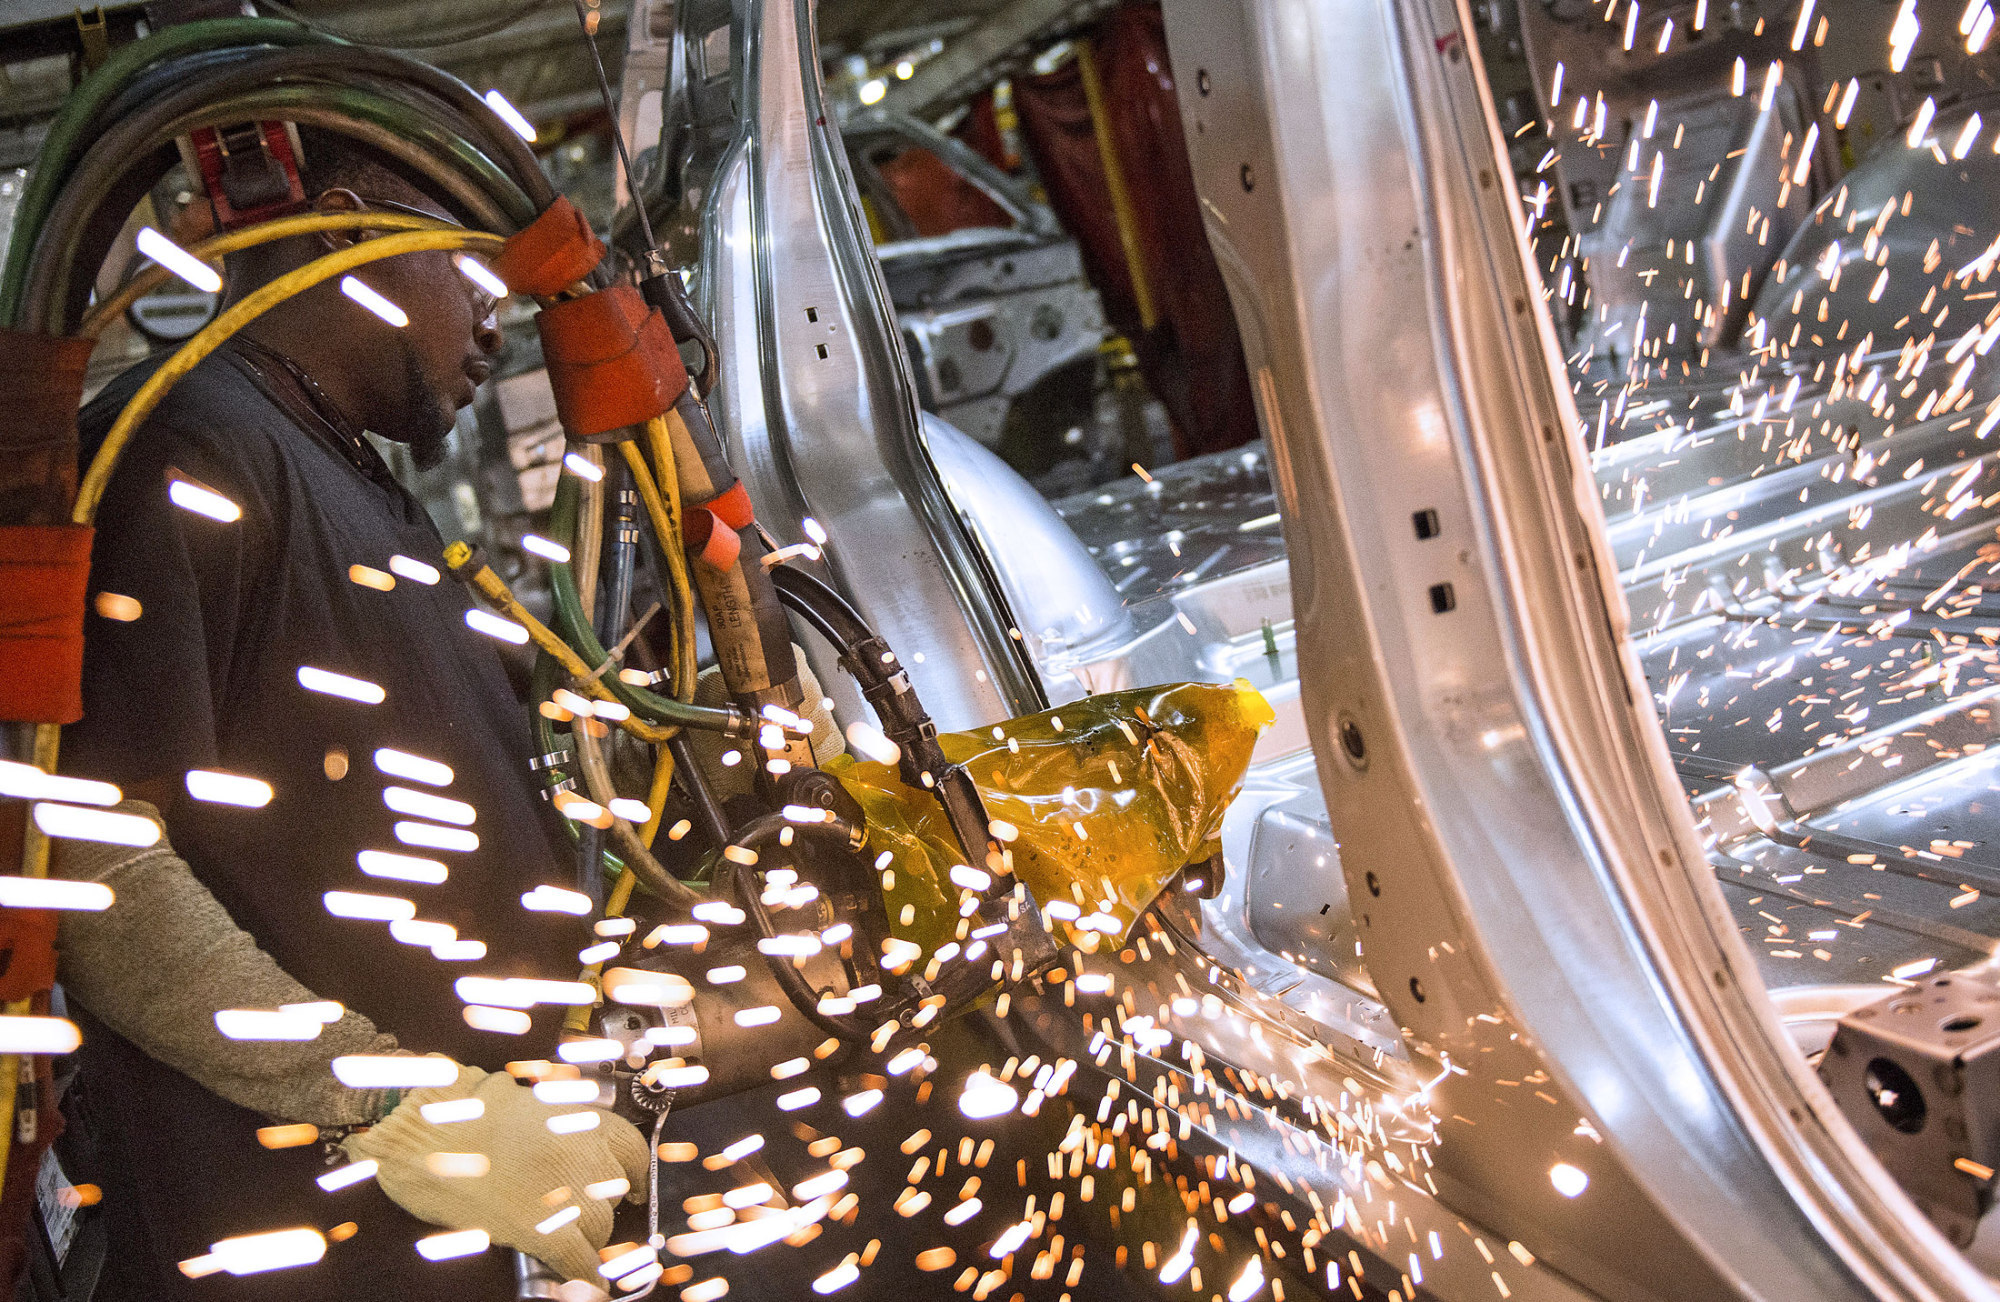 An employee welds together a frame for a sports utility vehicle during production at the General Motors Co. (GM) assembly plant in Arlington, Texas, on March 10, 2016.
